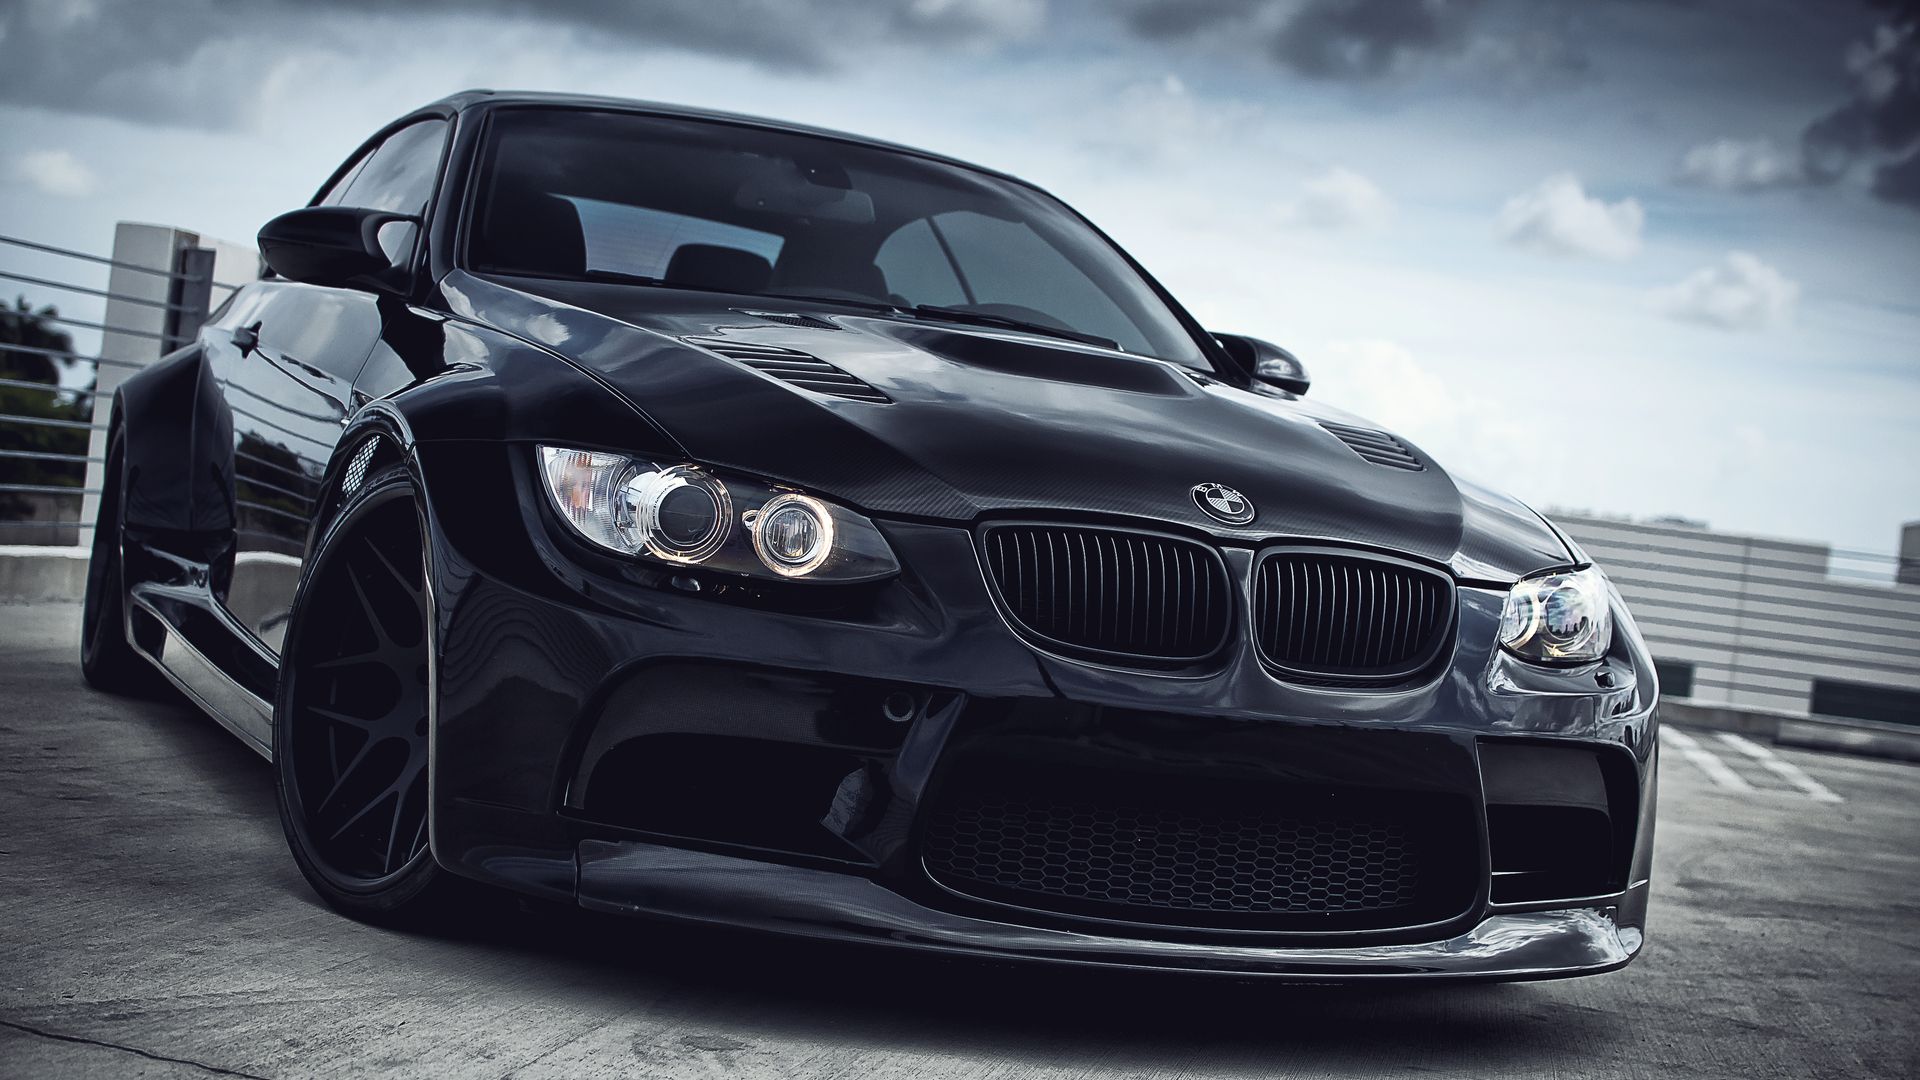 Bmw Cars Wallpapers For Desktop Hd